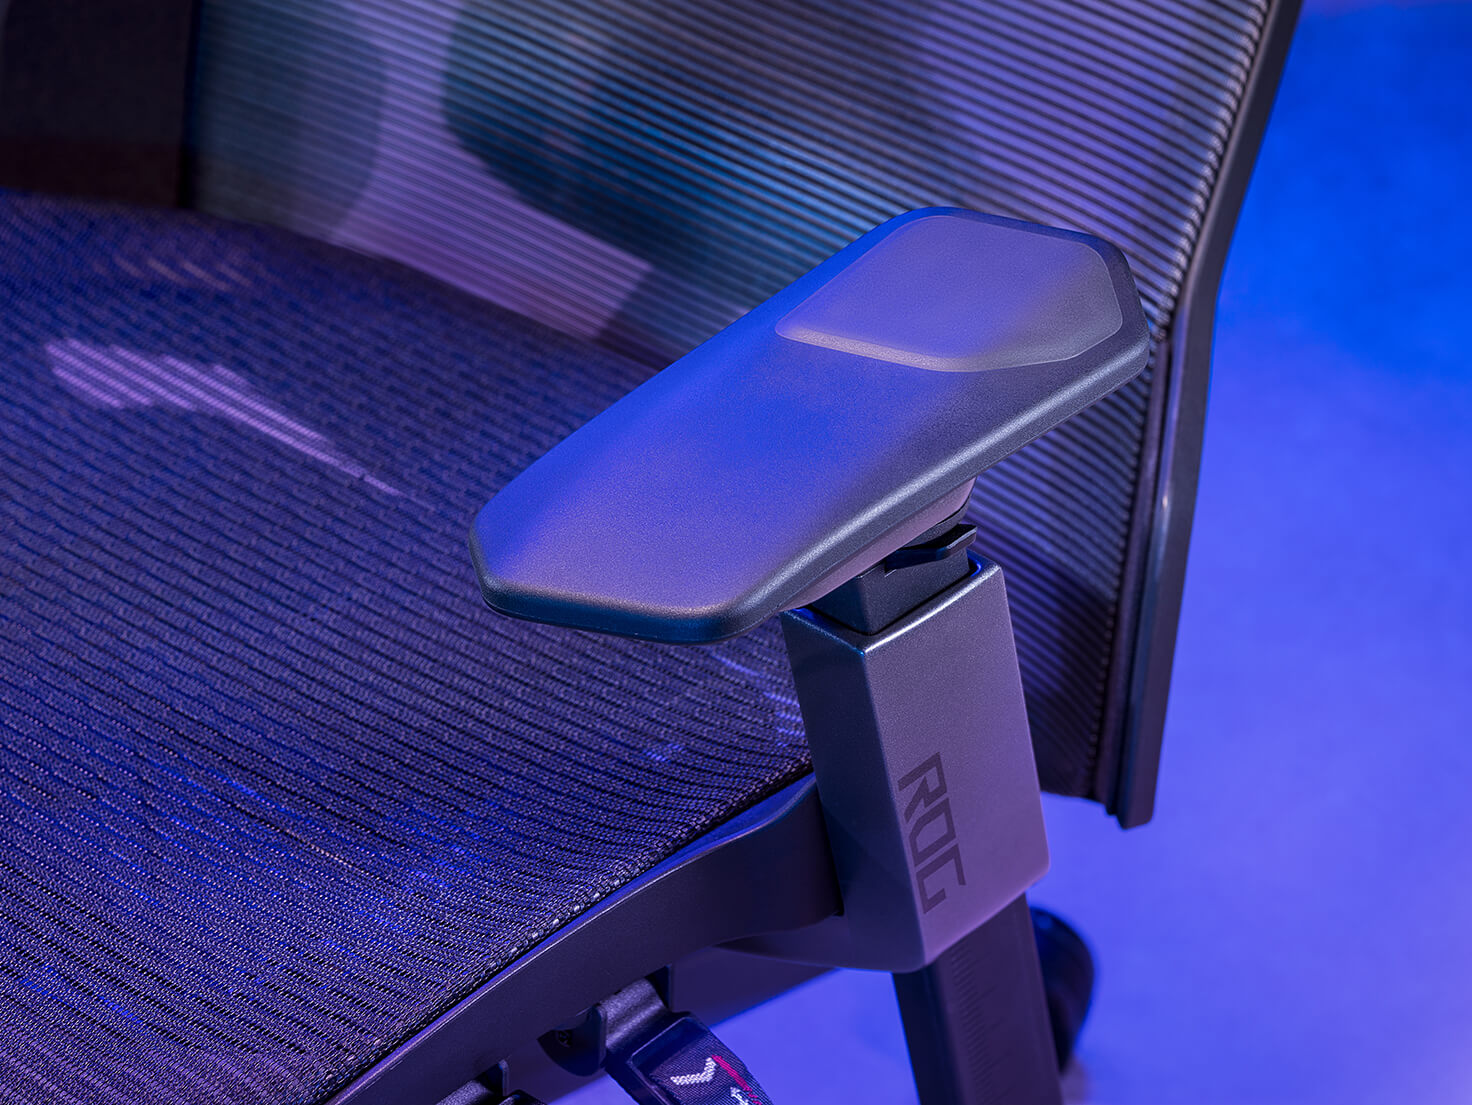 A close-up view of the PU foam material on the armrest of the ROG Destrier Ergo Gaming Chair